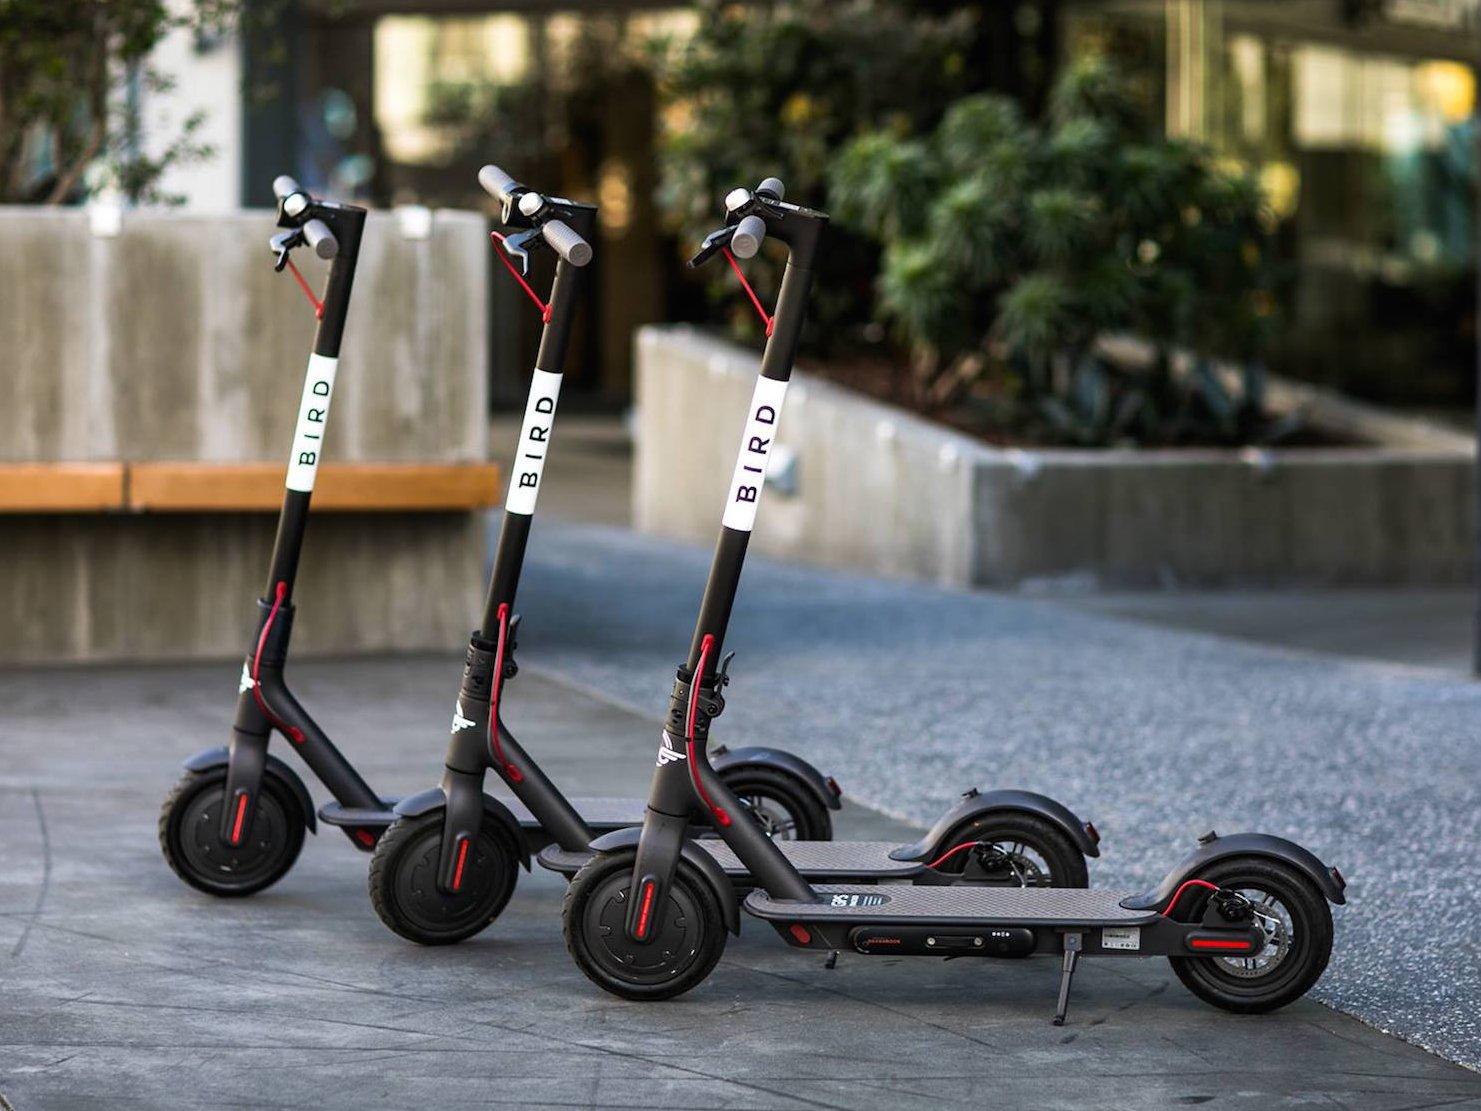 Three scooters standing in a row